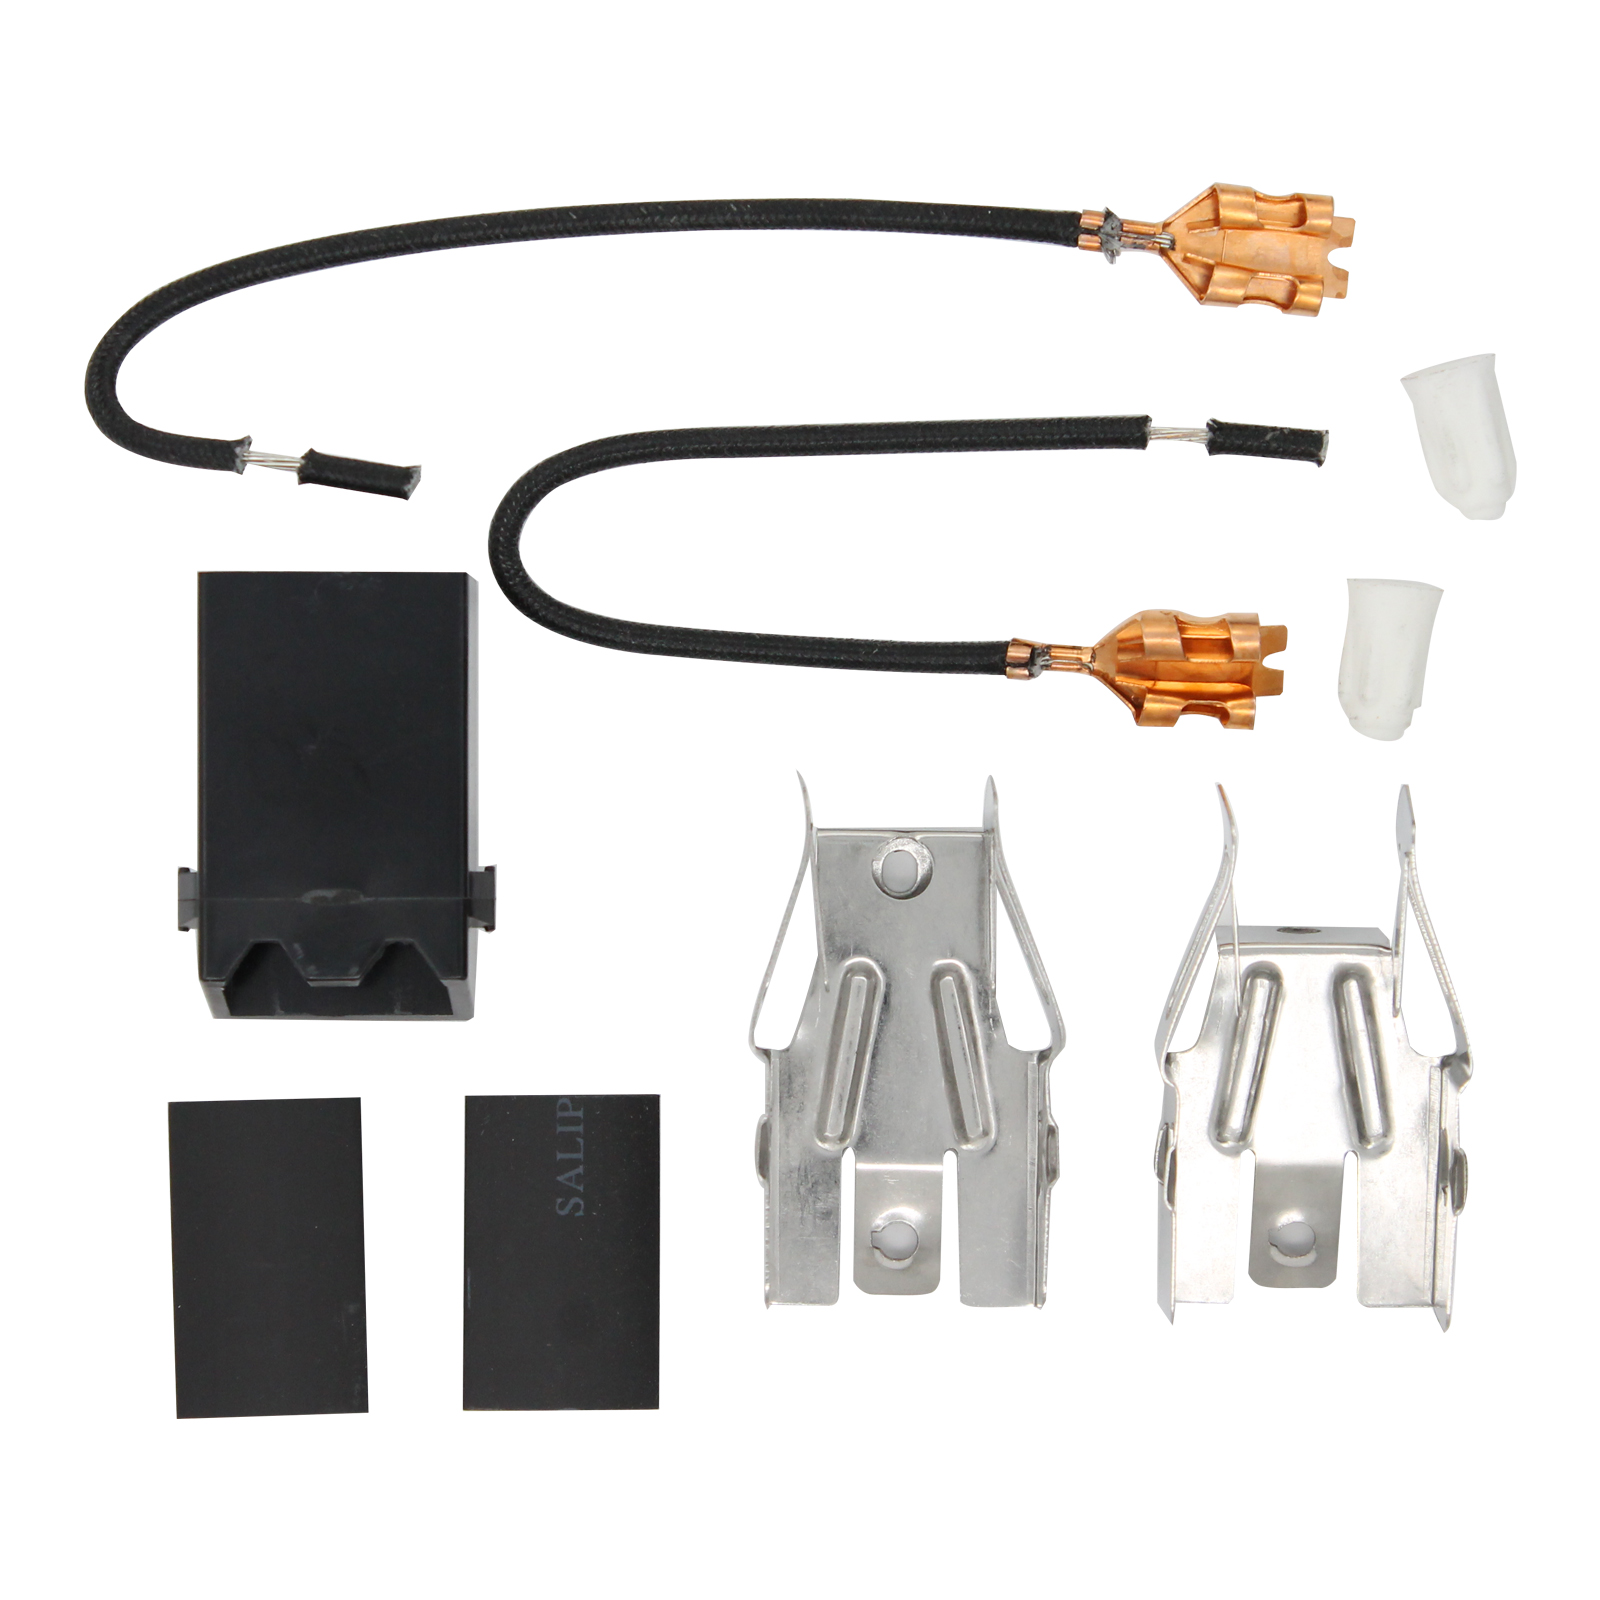 330031 Top Burner Receptacle Kit Replacement for Amana SBE26DC Range/Cooktop/Oven - Compatible with 330031 Range Burner Receptacle Kit - UpStart Components Brand - image 4 of 4